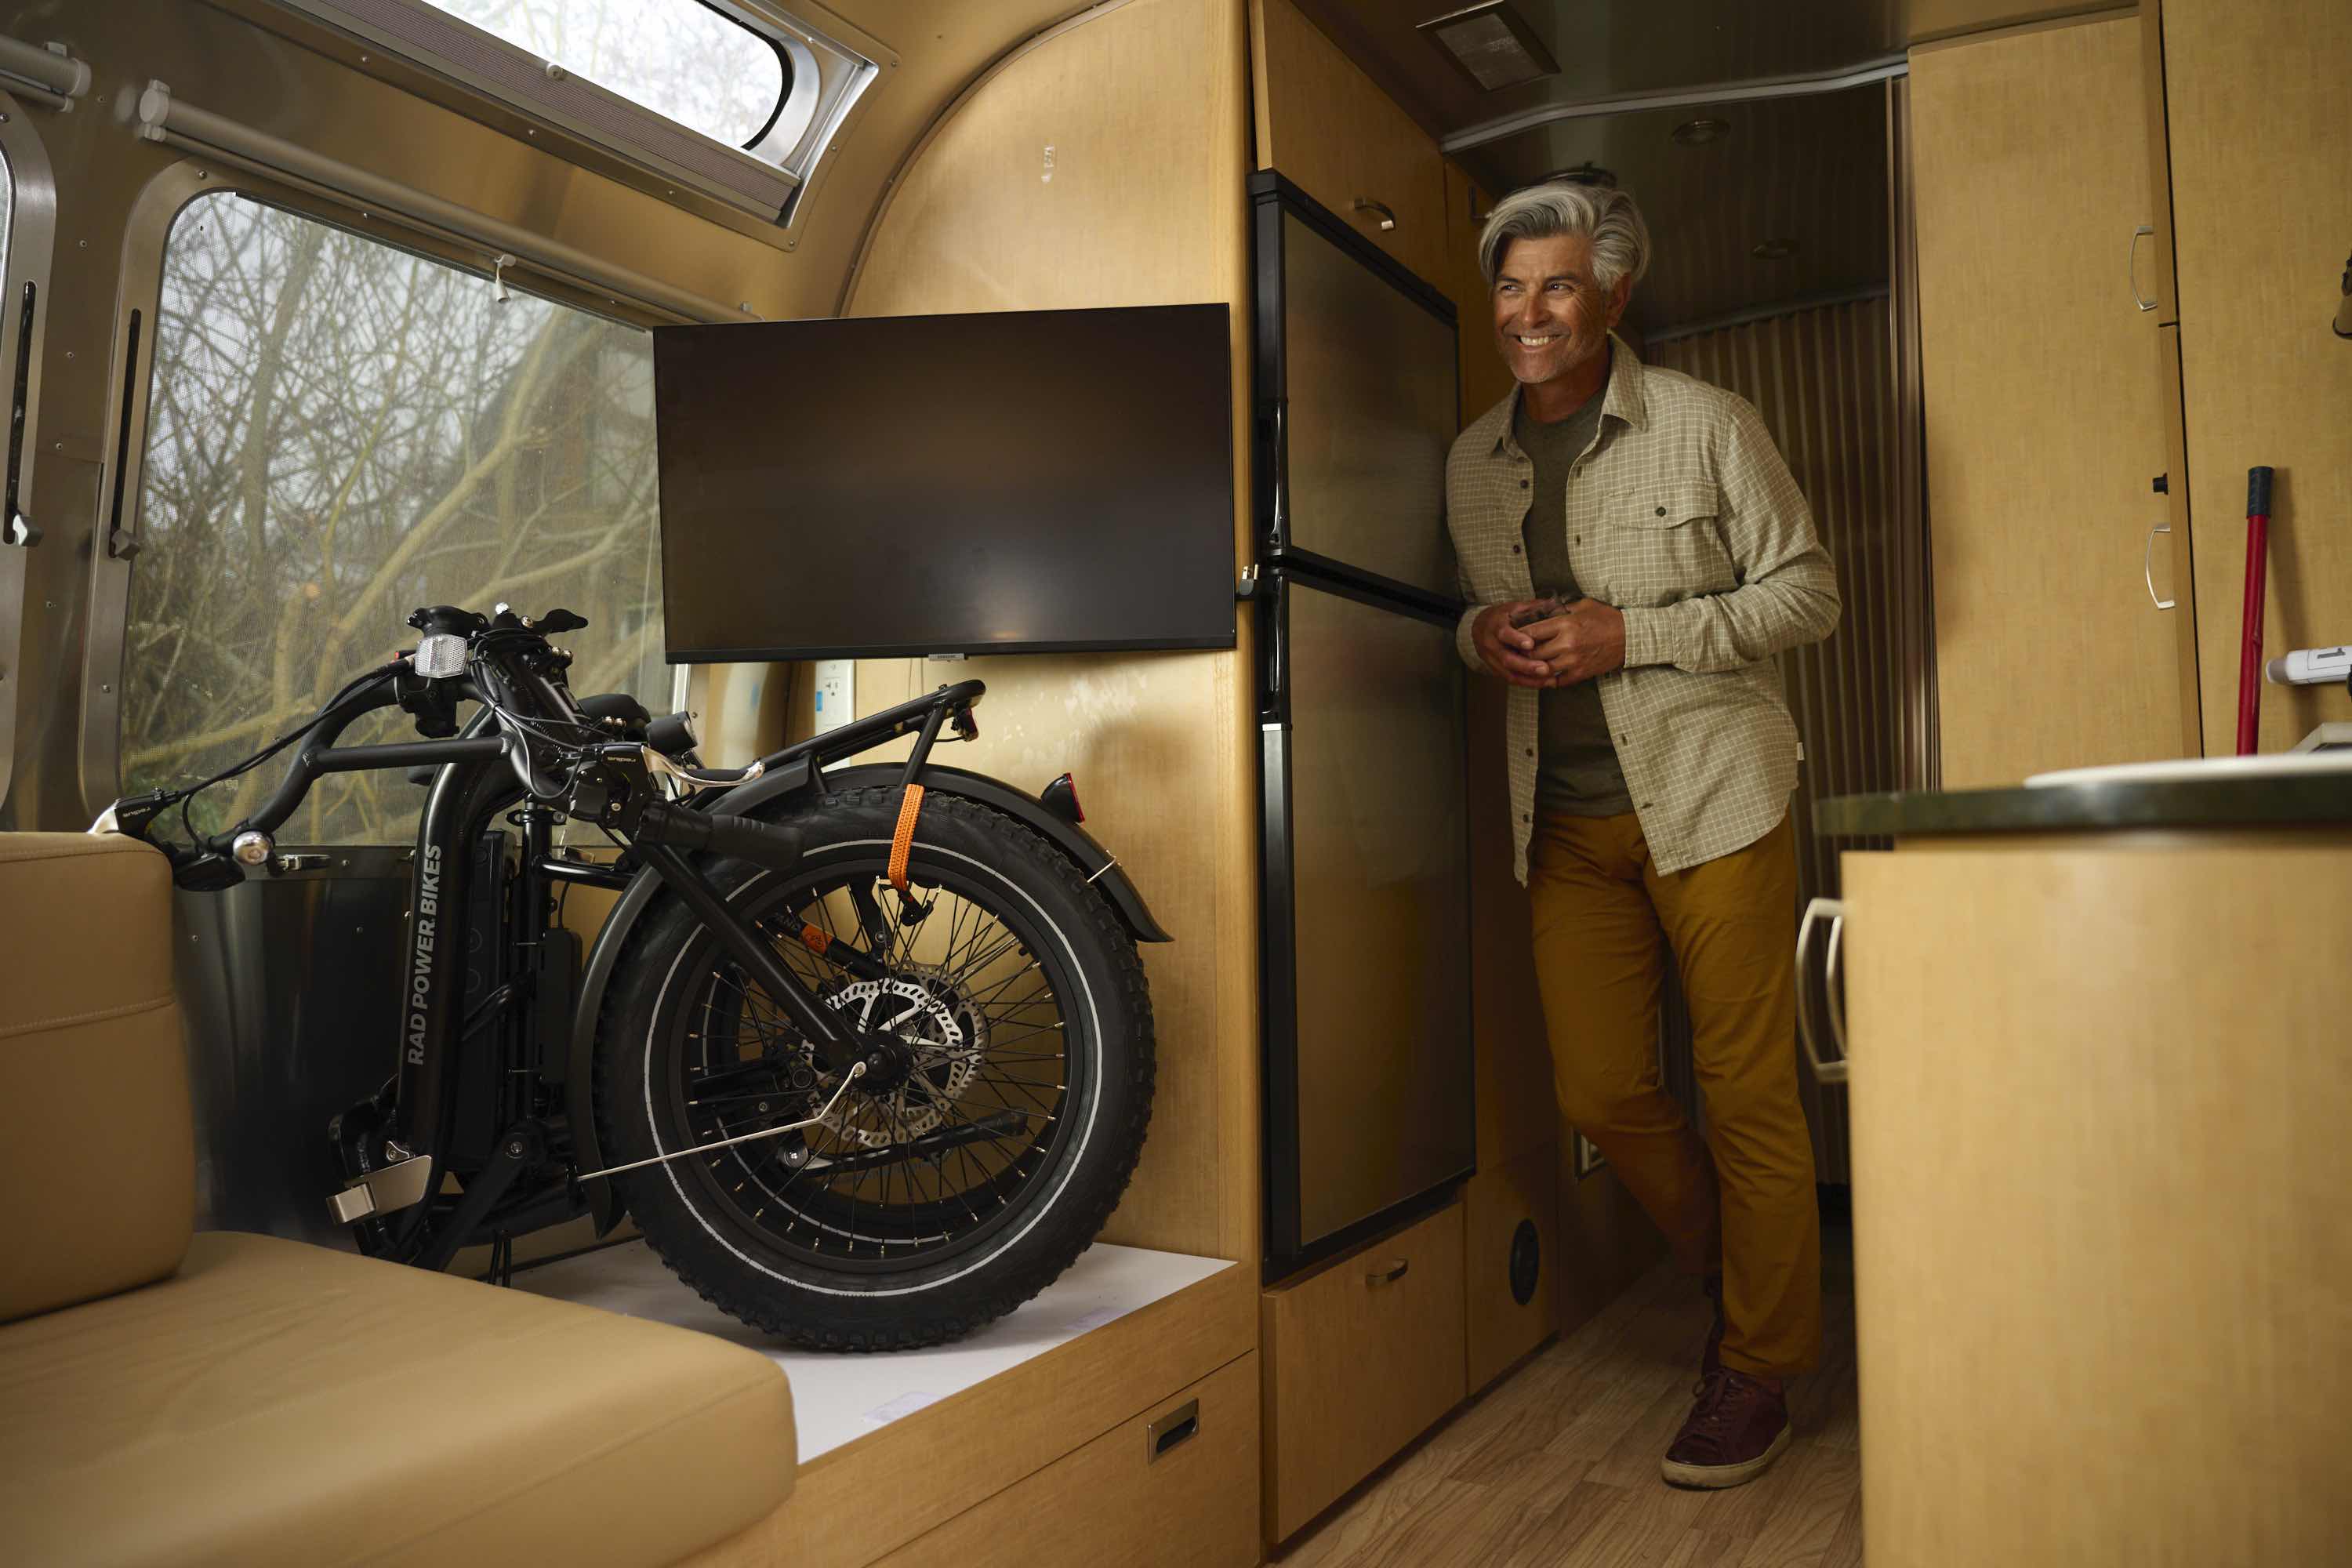 A silver haired man stands next to a folded-up RadExpand in an RV.